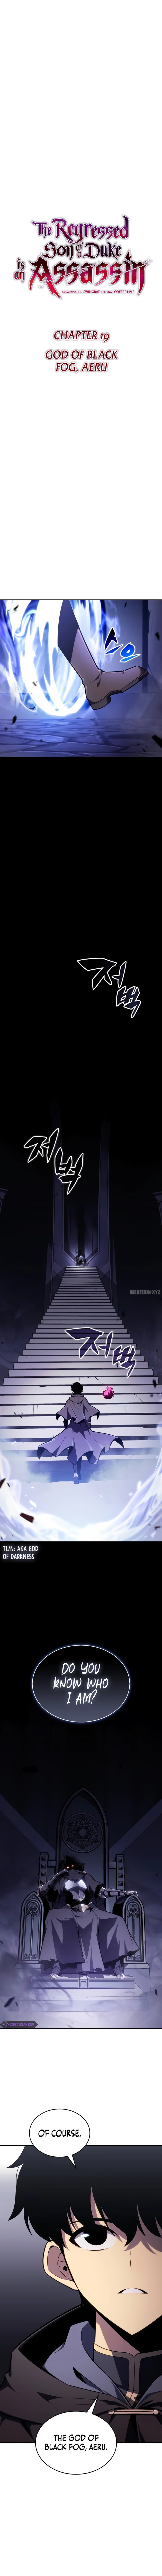 The Regressed Son of a Duke is an Assassin - Chapter 19 Page 3